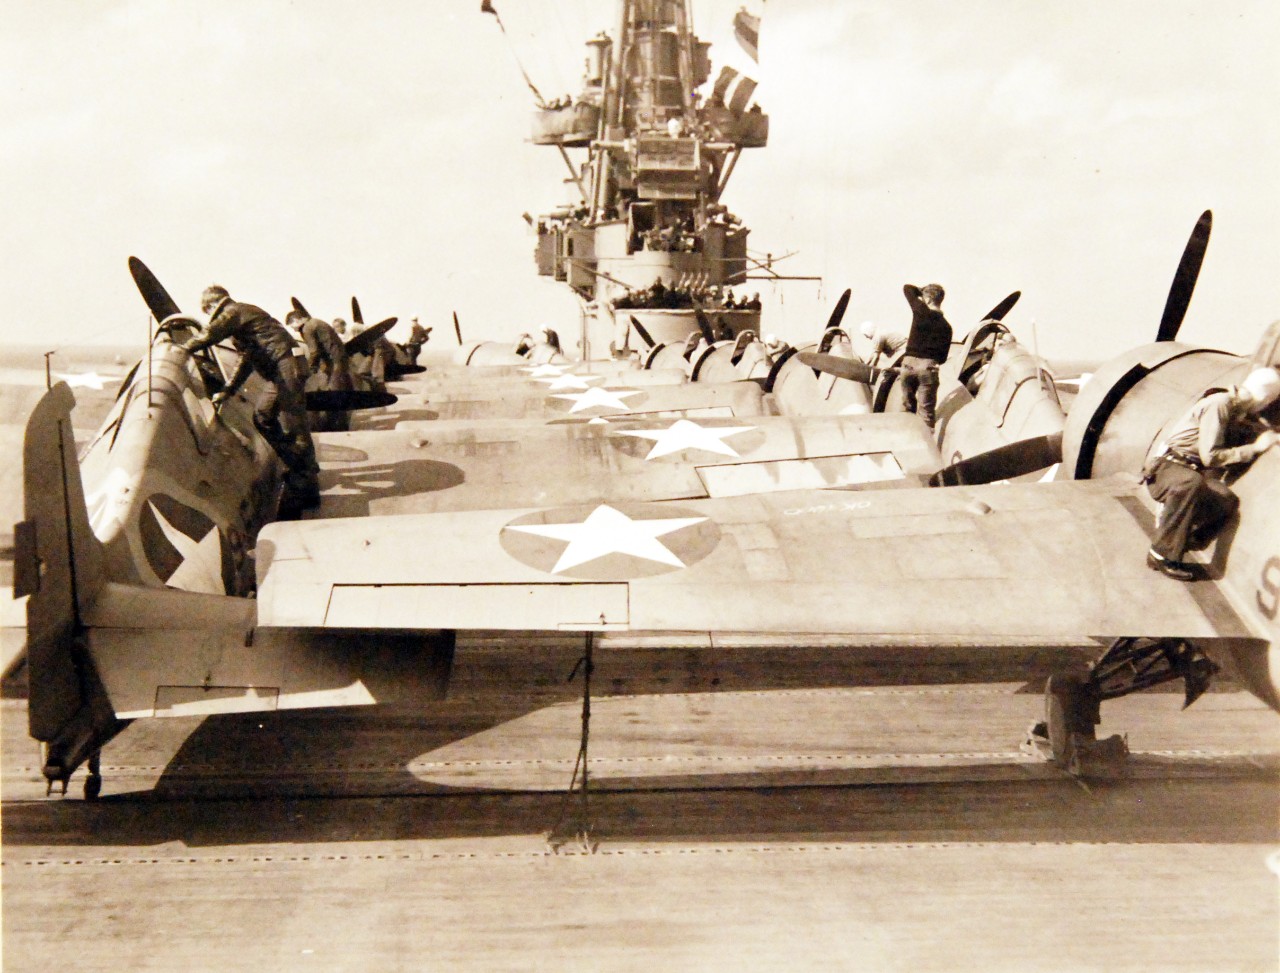 <p>80-G-30281: Operation Torch, November 1942. Planes of USS Ranger (CV-4) en-route to invade French North Africa. Plane captains check over fighters, preparatory to taking off on another raid while the pilots are below being briefed by intelligence officers.&nbsp;</p>
